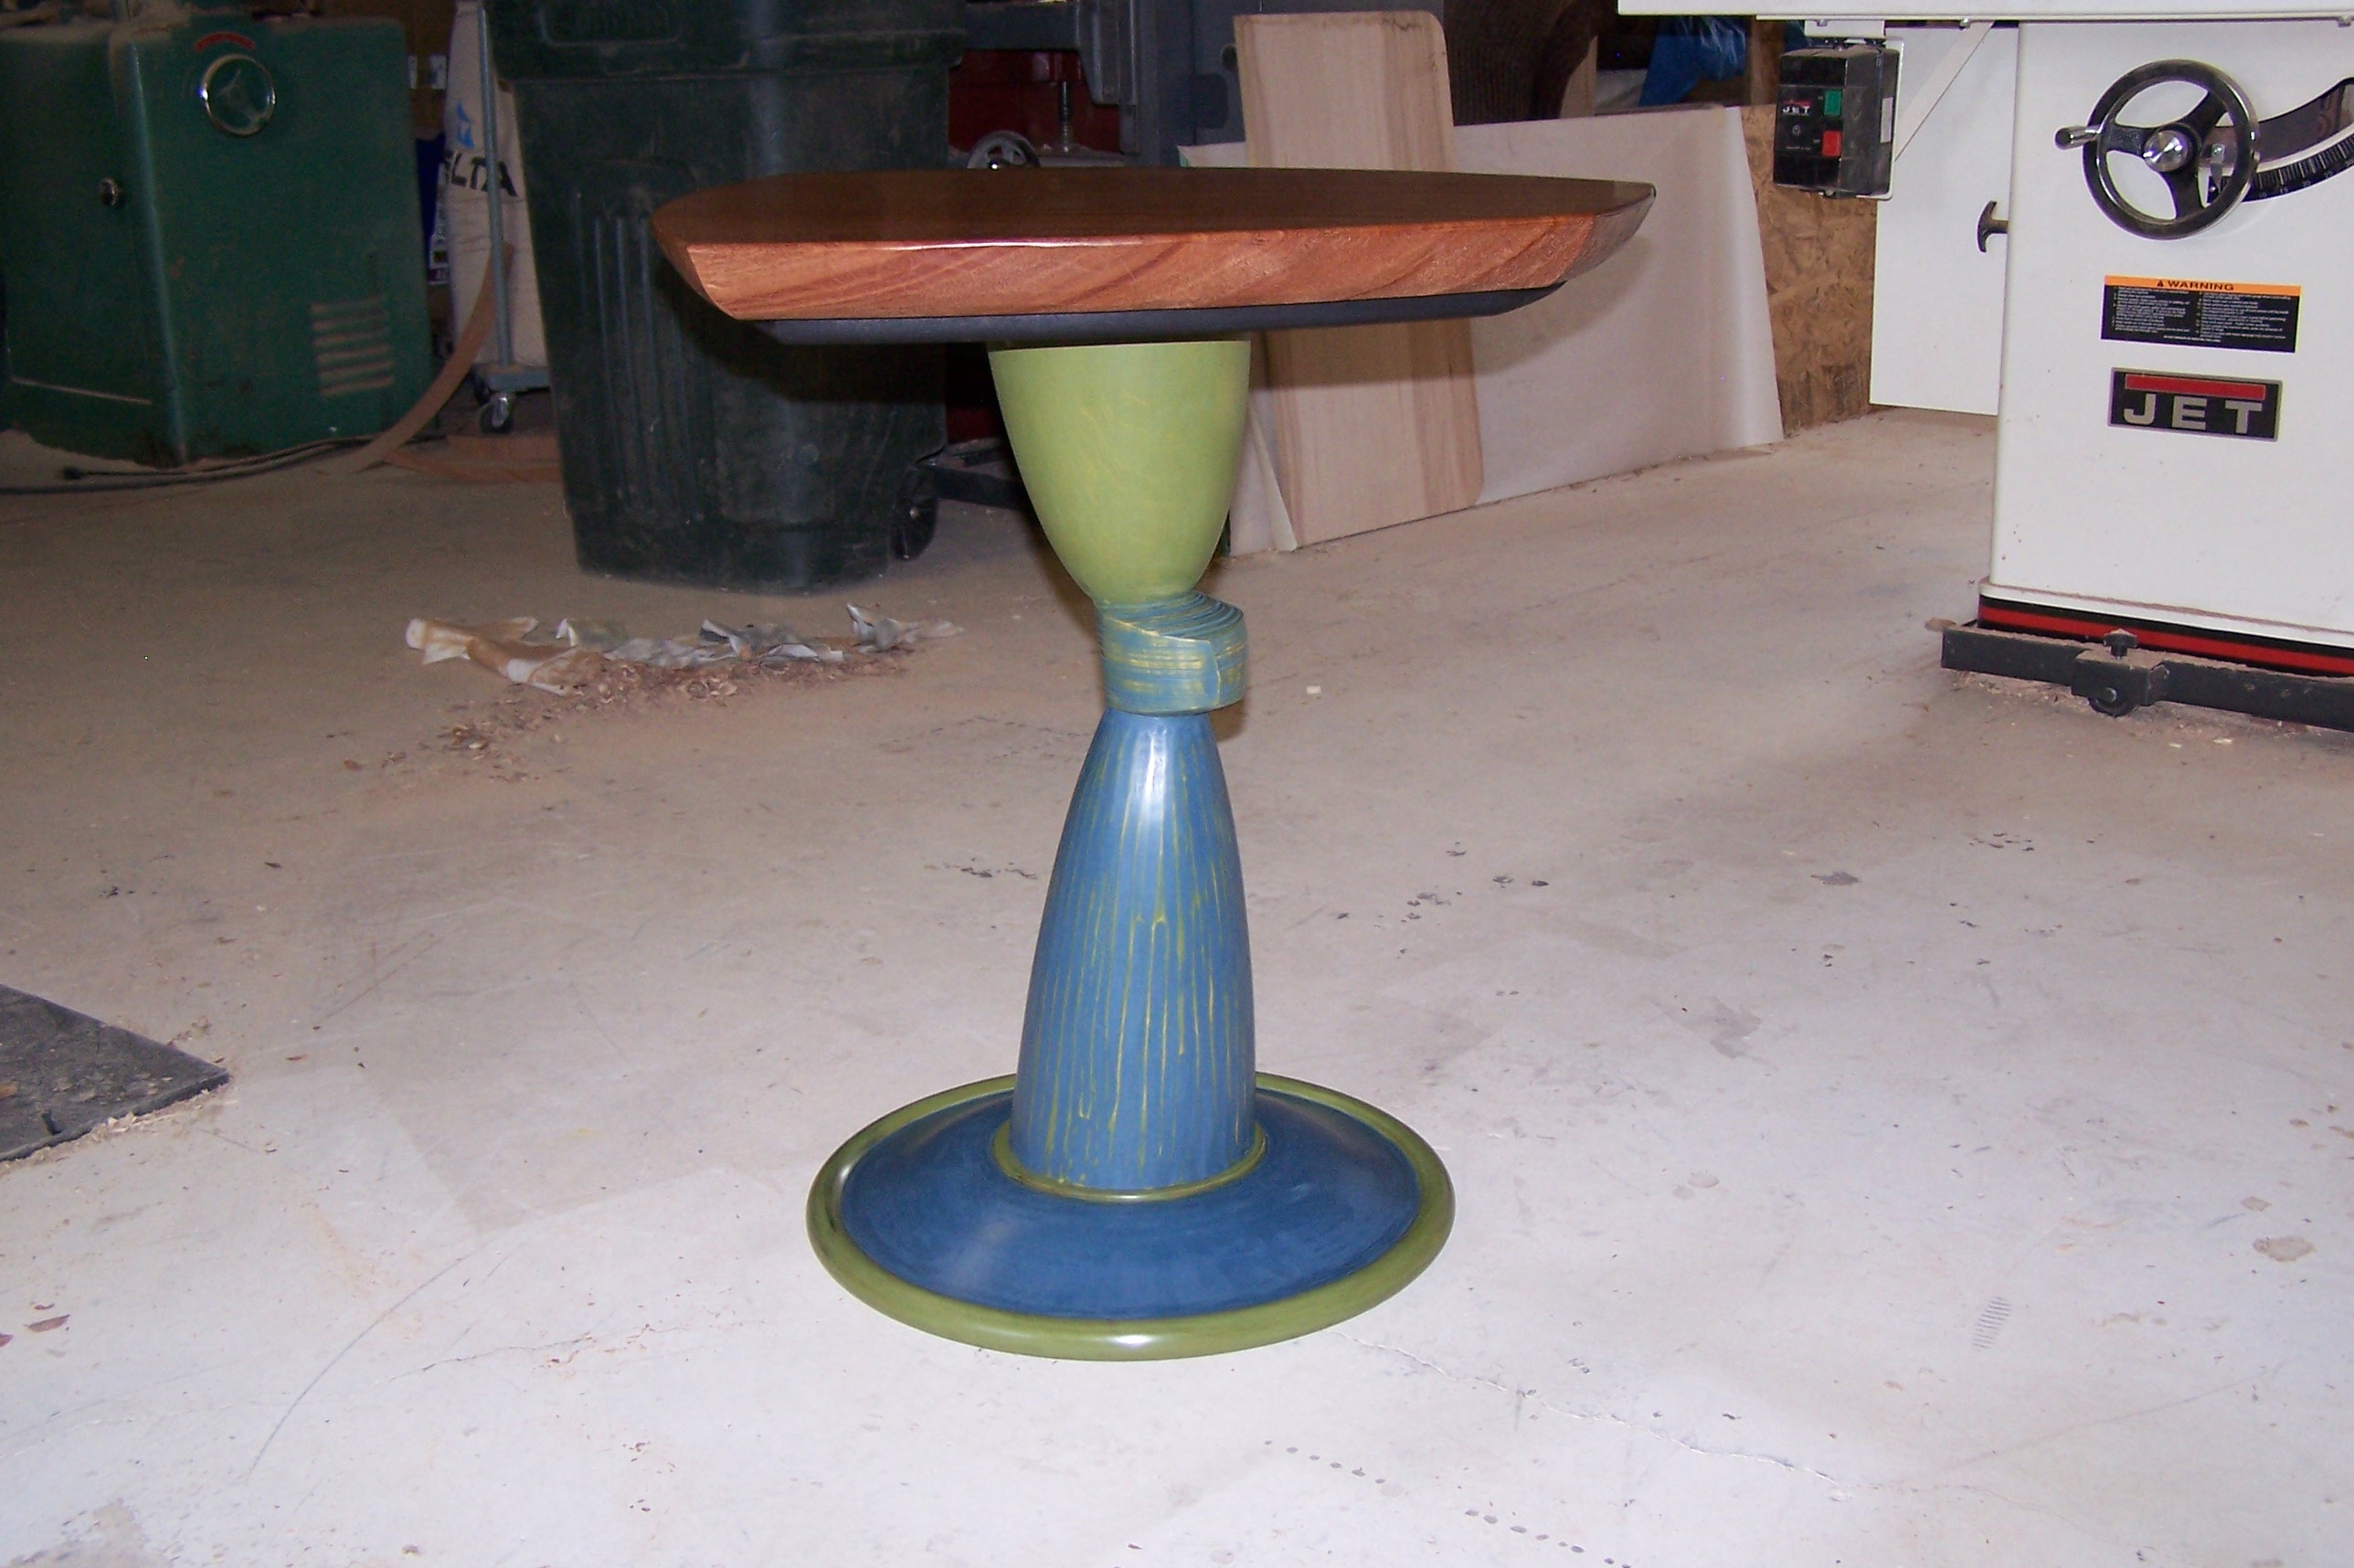 Off-Center Table, millk paint with African Mahogany top